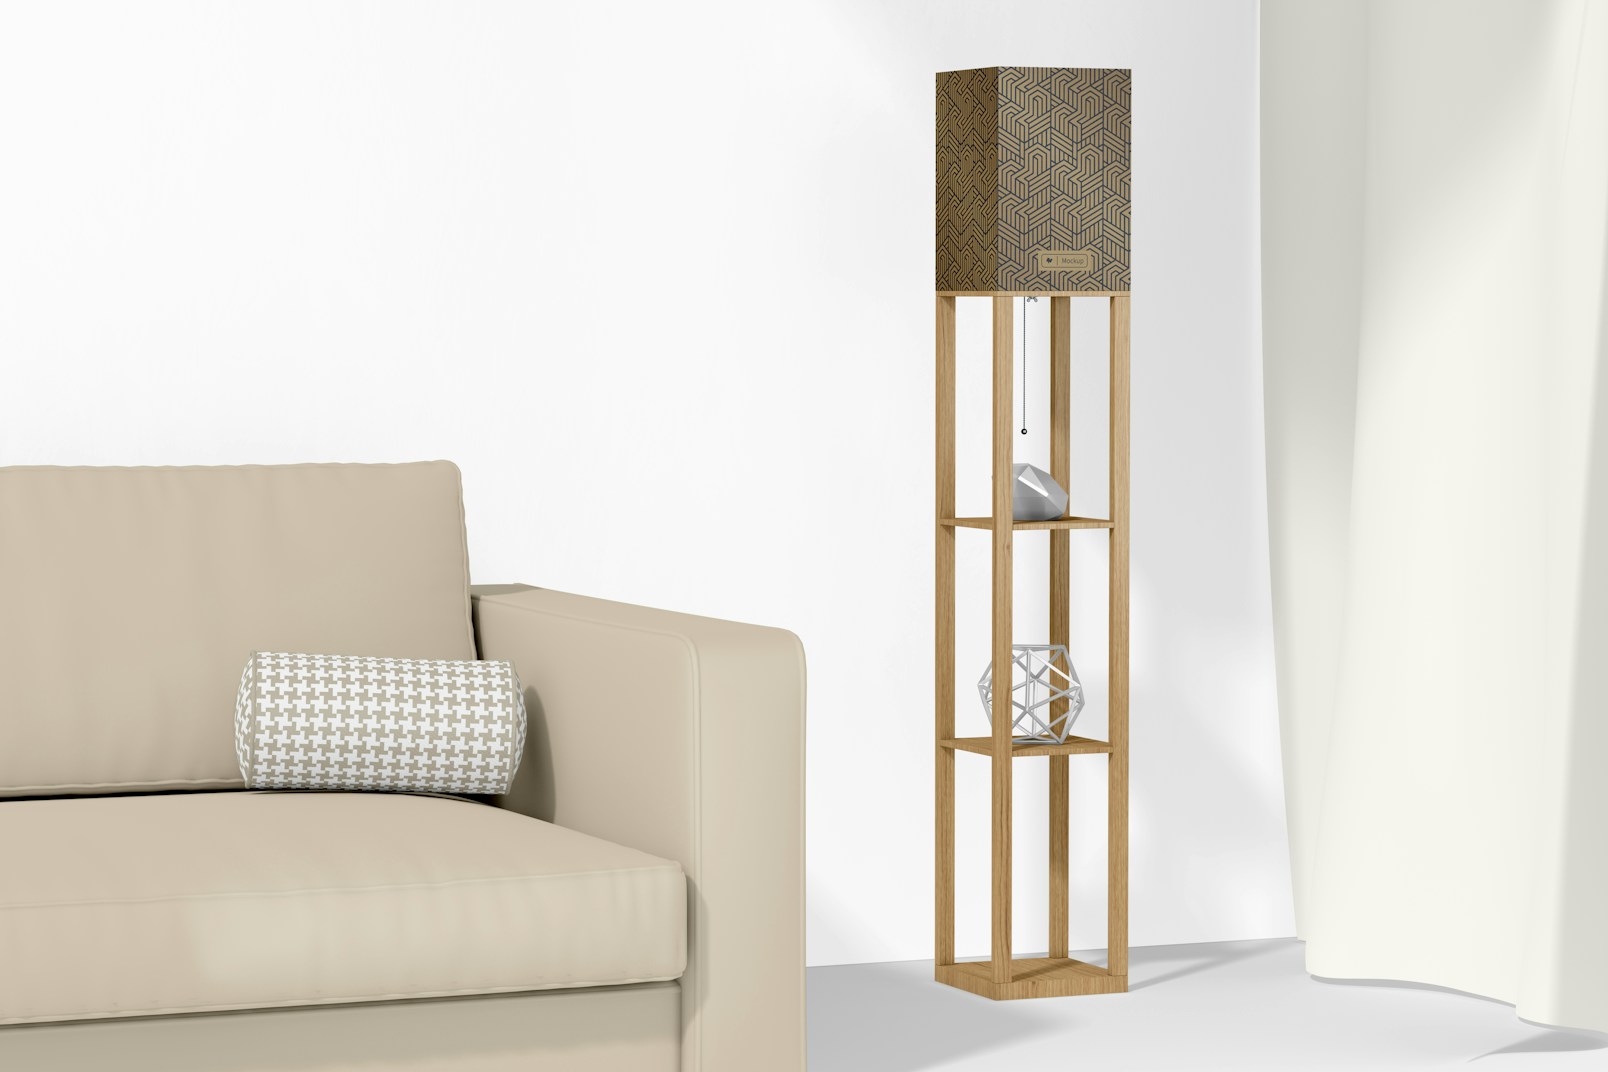 Floor Lamp with Wooden Shelves with Sofa Mockup